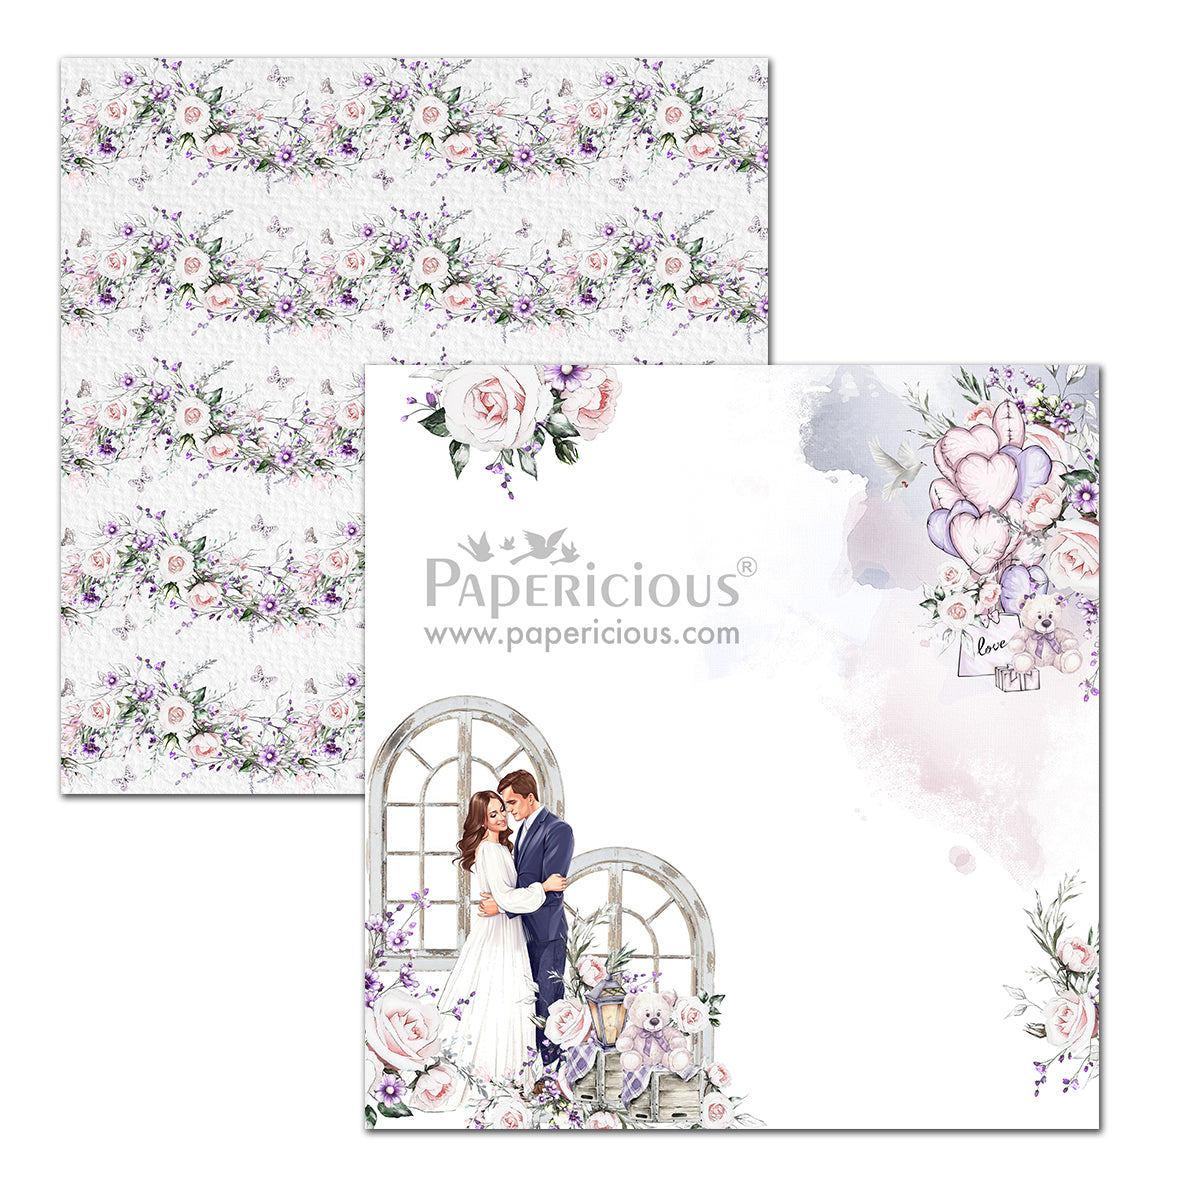 PAPERICIOUS - L'Amour -  Designer Pattern Printed Scrapbook Papers 12x12 inch  / 20 sheets